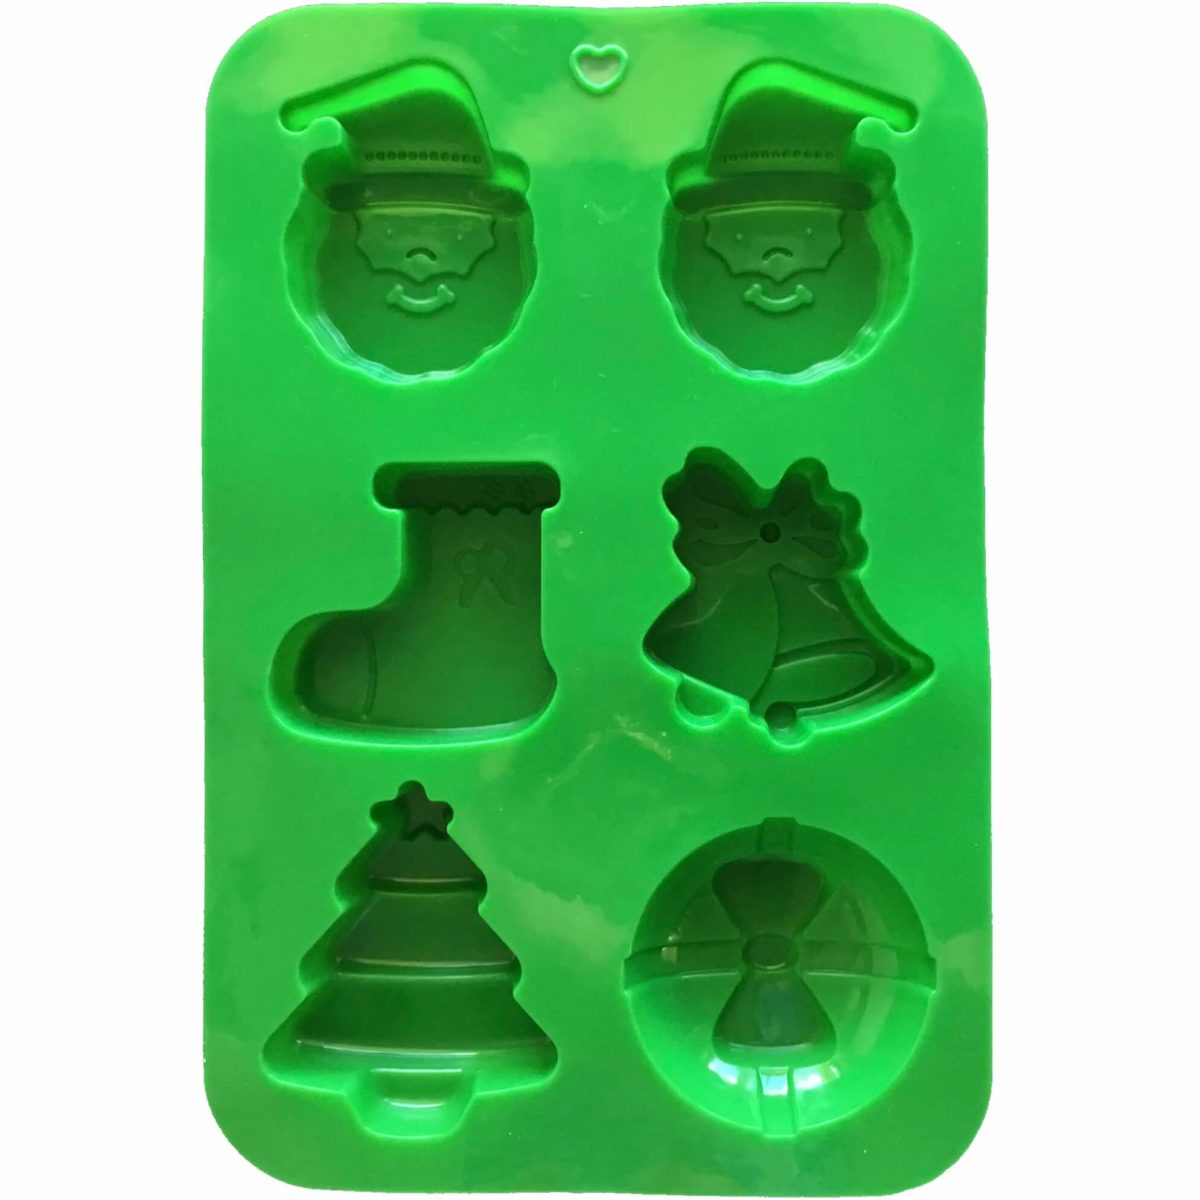 back of green christmas themed silcone mould with santa, stocking, bells, bauble and christmas tree cavities showing cavity details